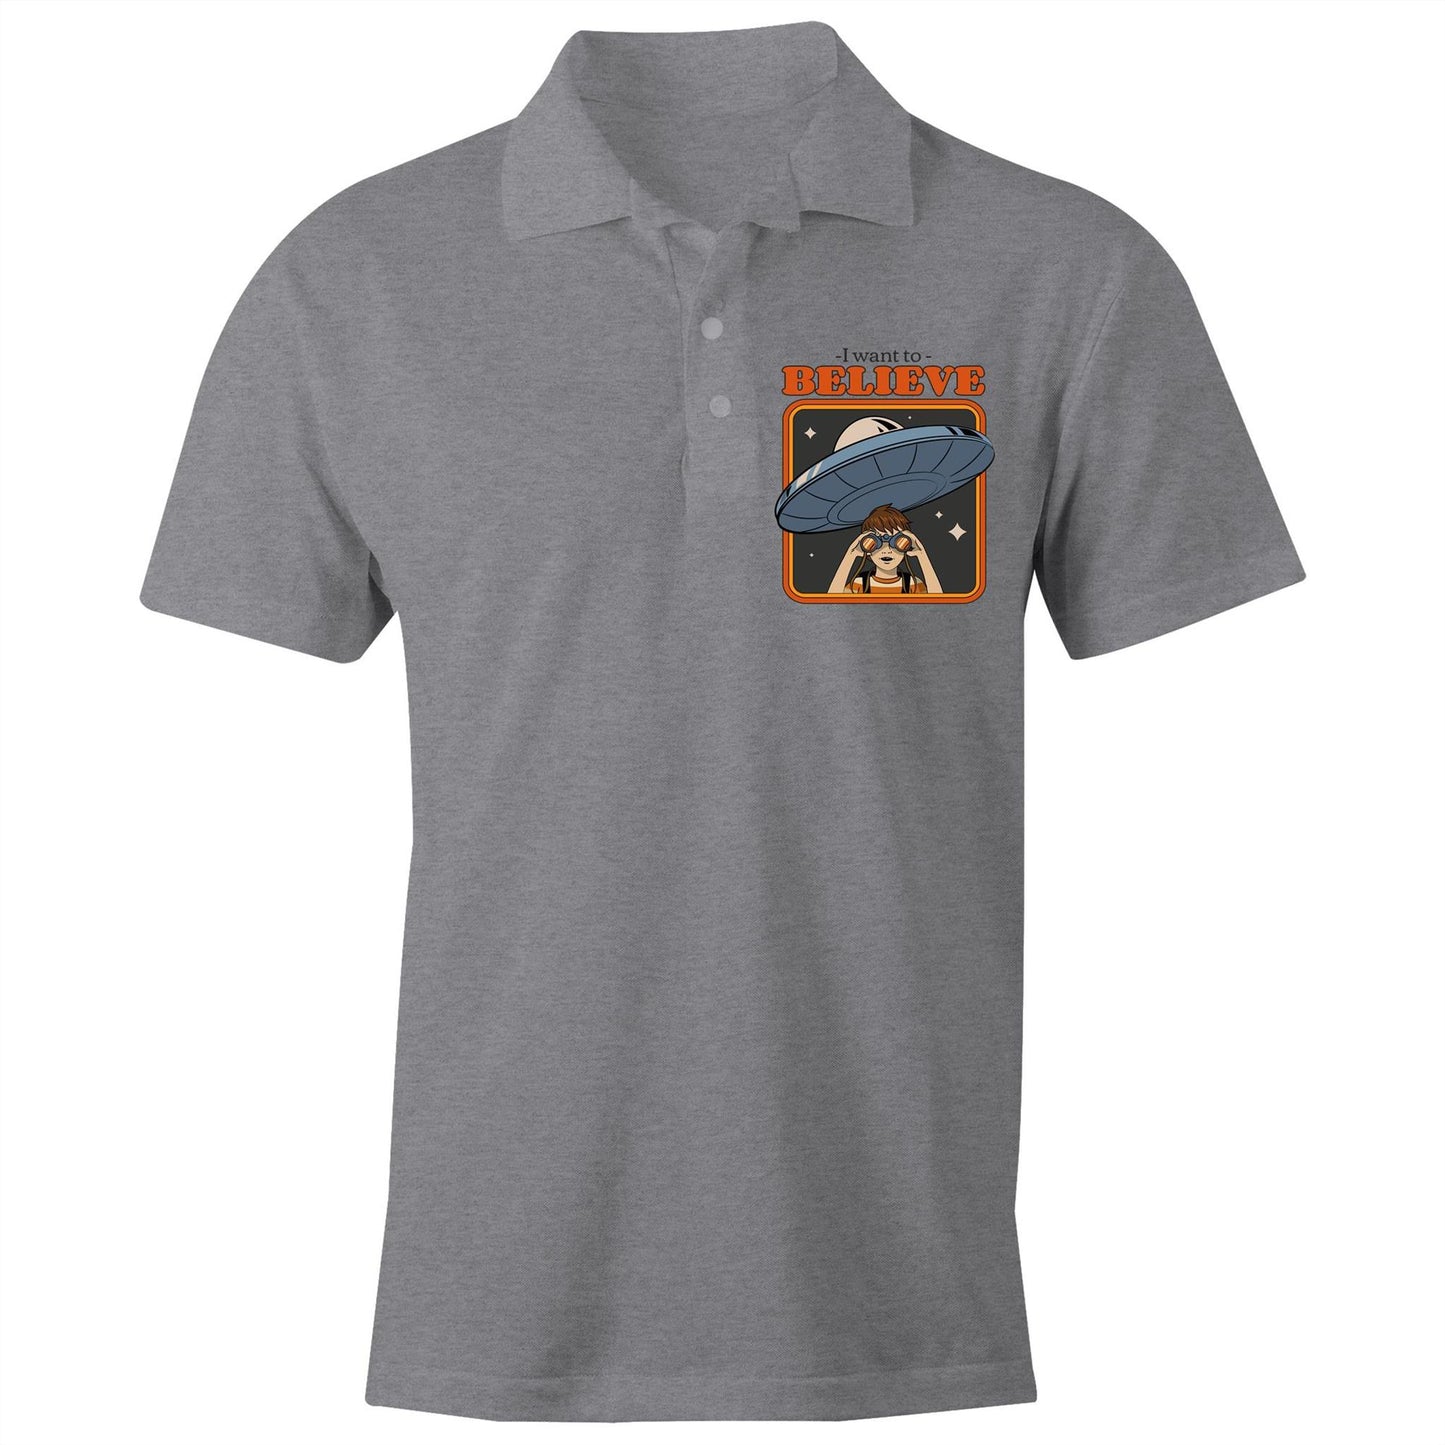 I Want To Believe - Chad S/S Polo Shirt, Printed Grey Marle Polo Shirt Retro Sci Fi